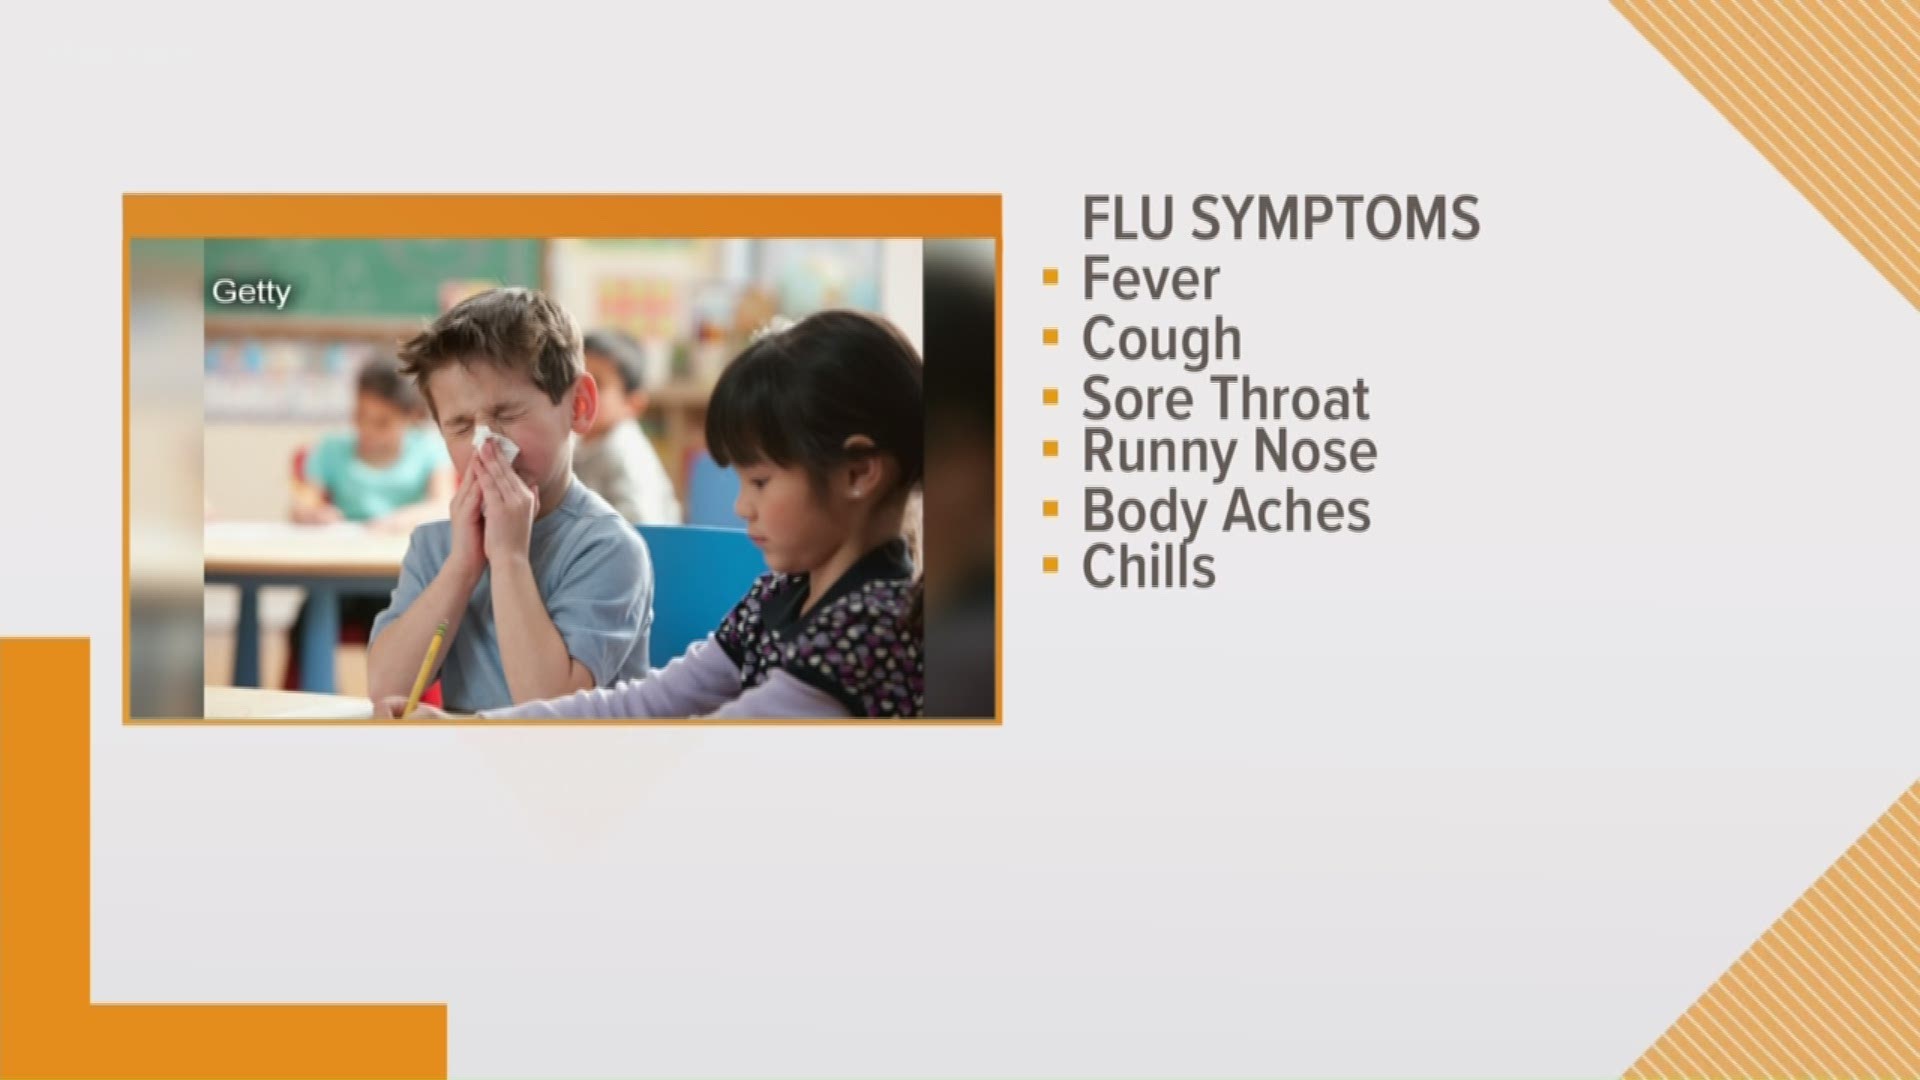 Health check: Has your family fought the flu this season?